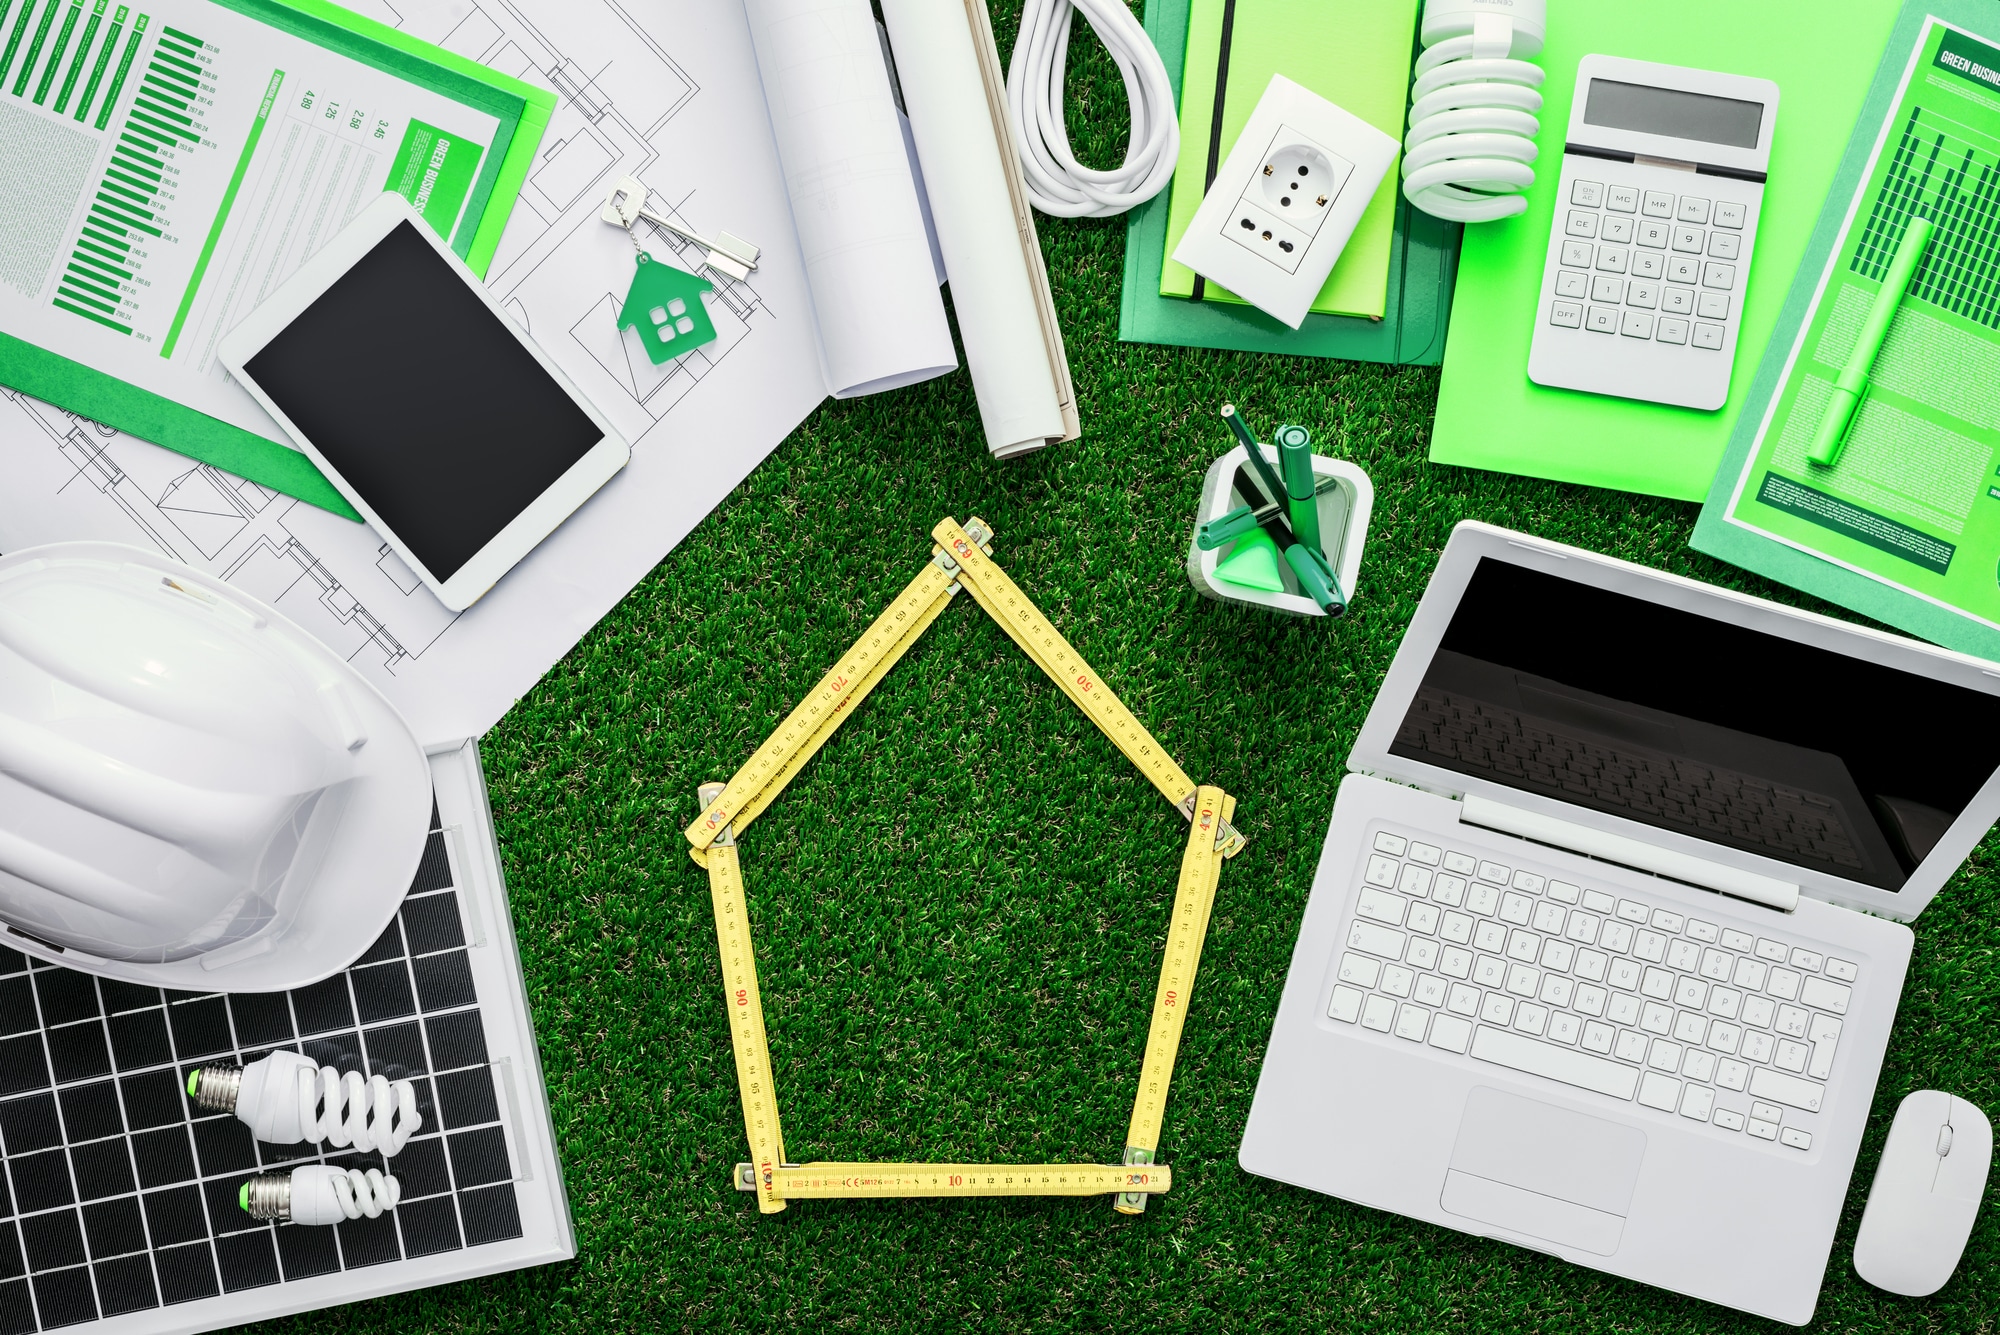 House project, tools, laptop and solar panel on a grass desktop, folding meter composing a house at center, green building concept